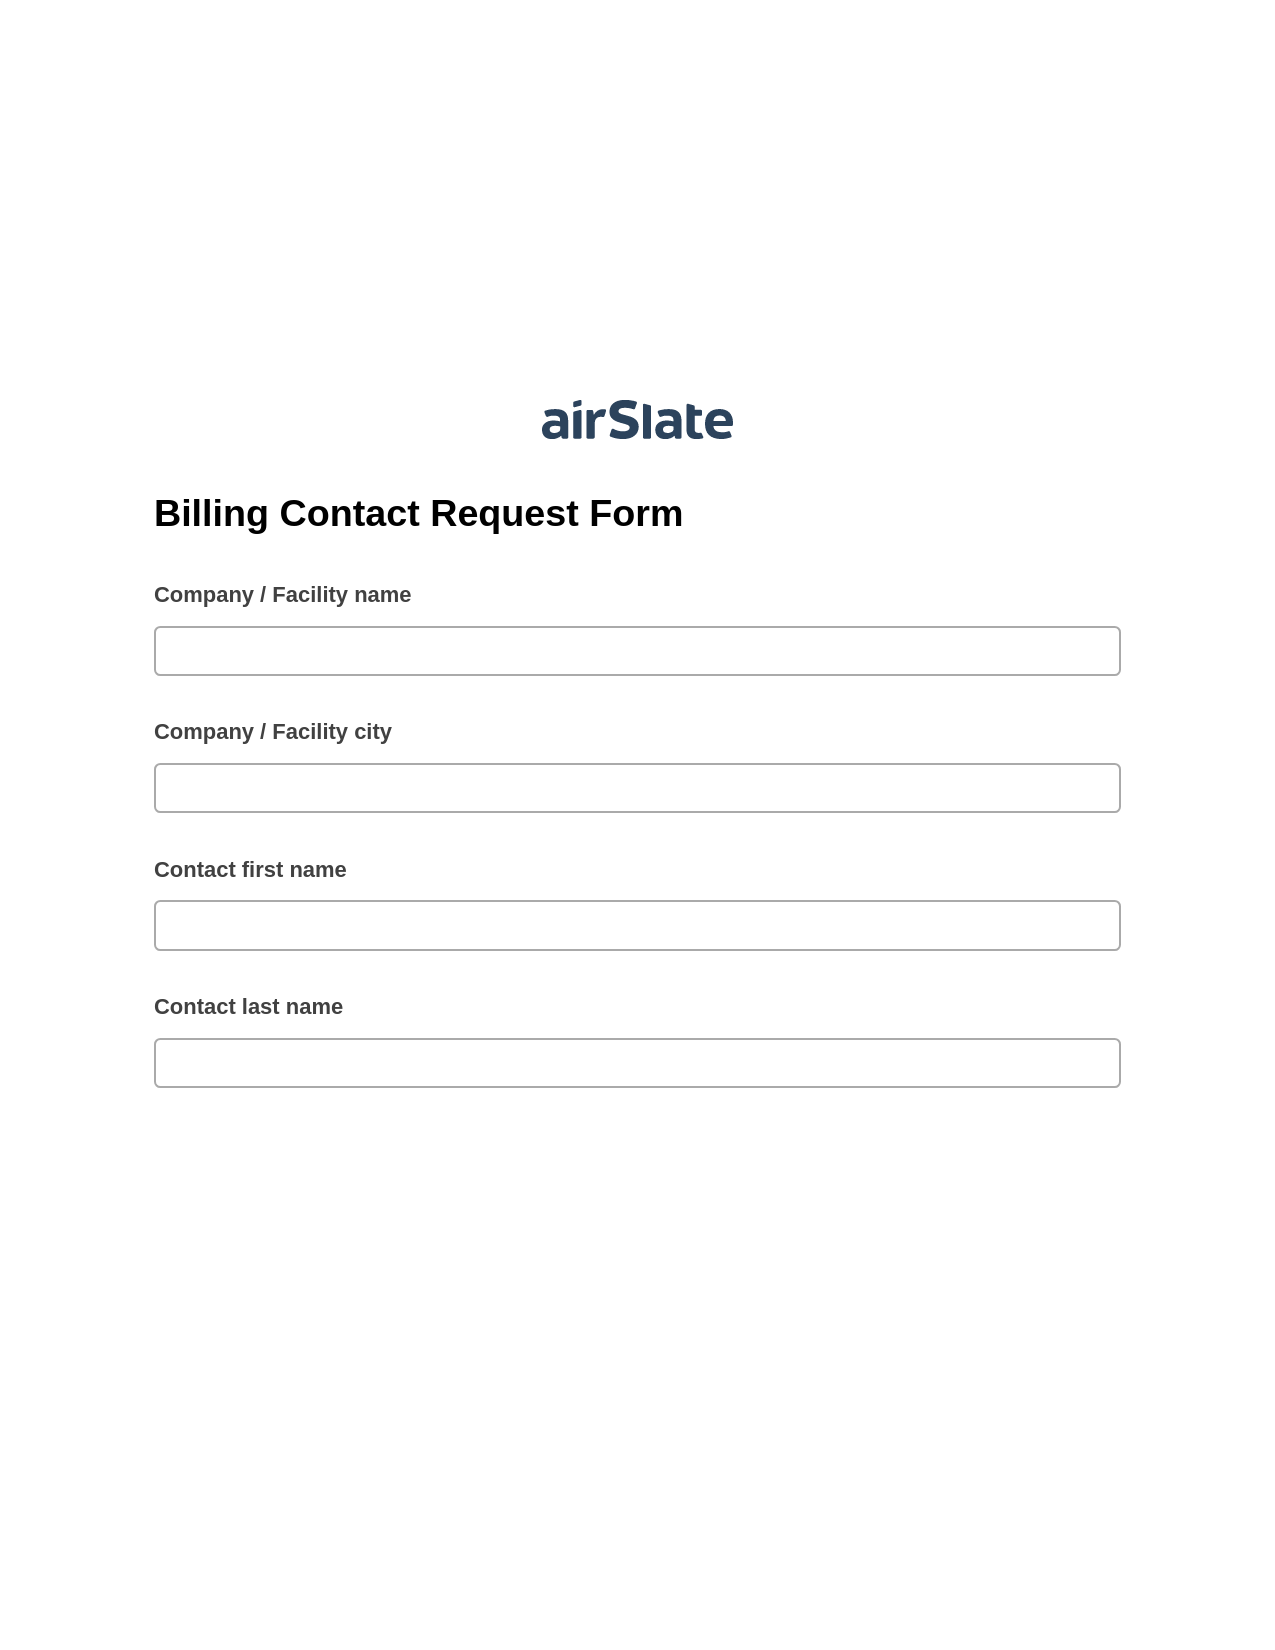 Billing Contact Request Form Pre-fill Dropdowns from Google Sheet Bot, Audit Trail Bot, Email Notification Postfinish Bot